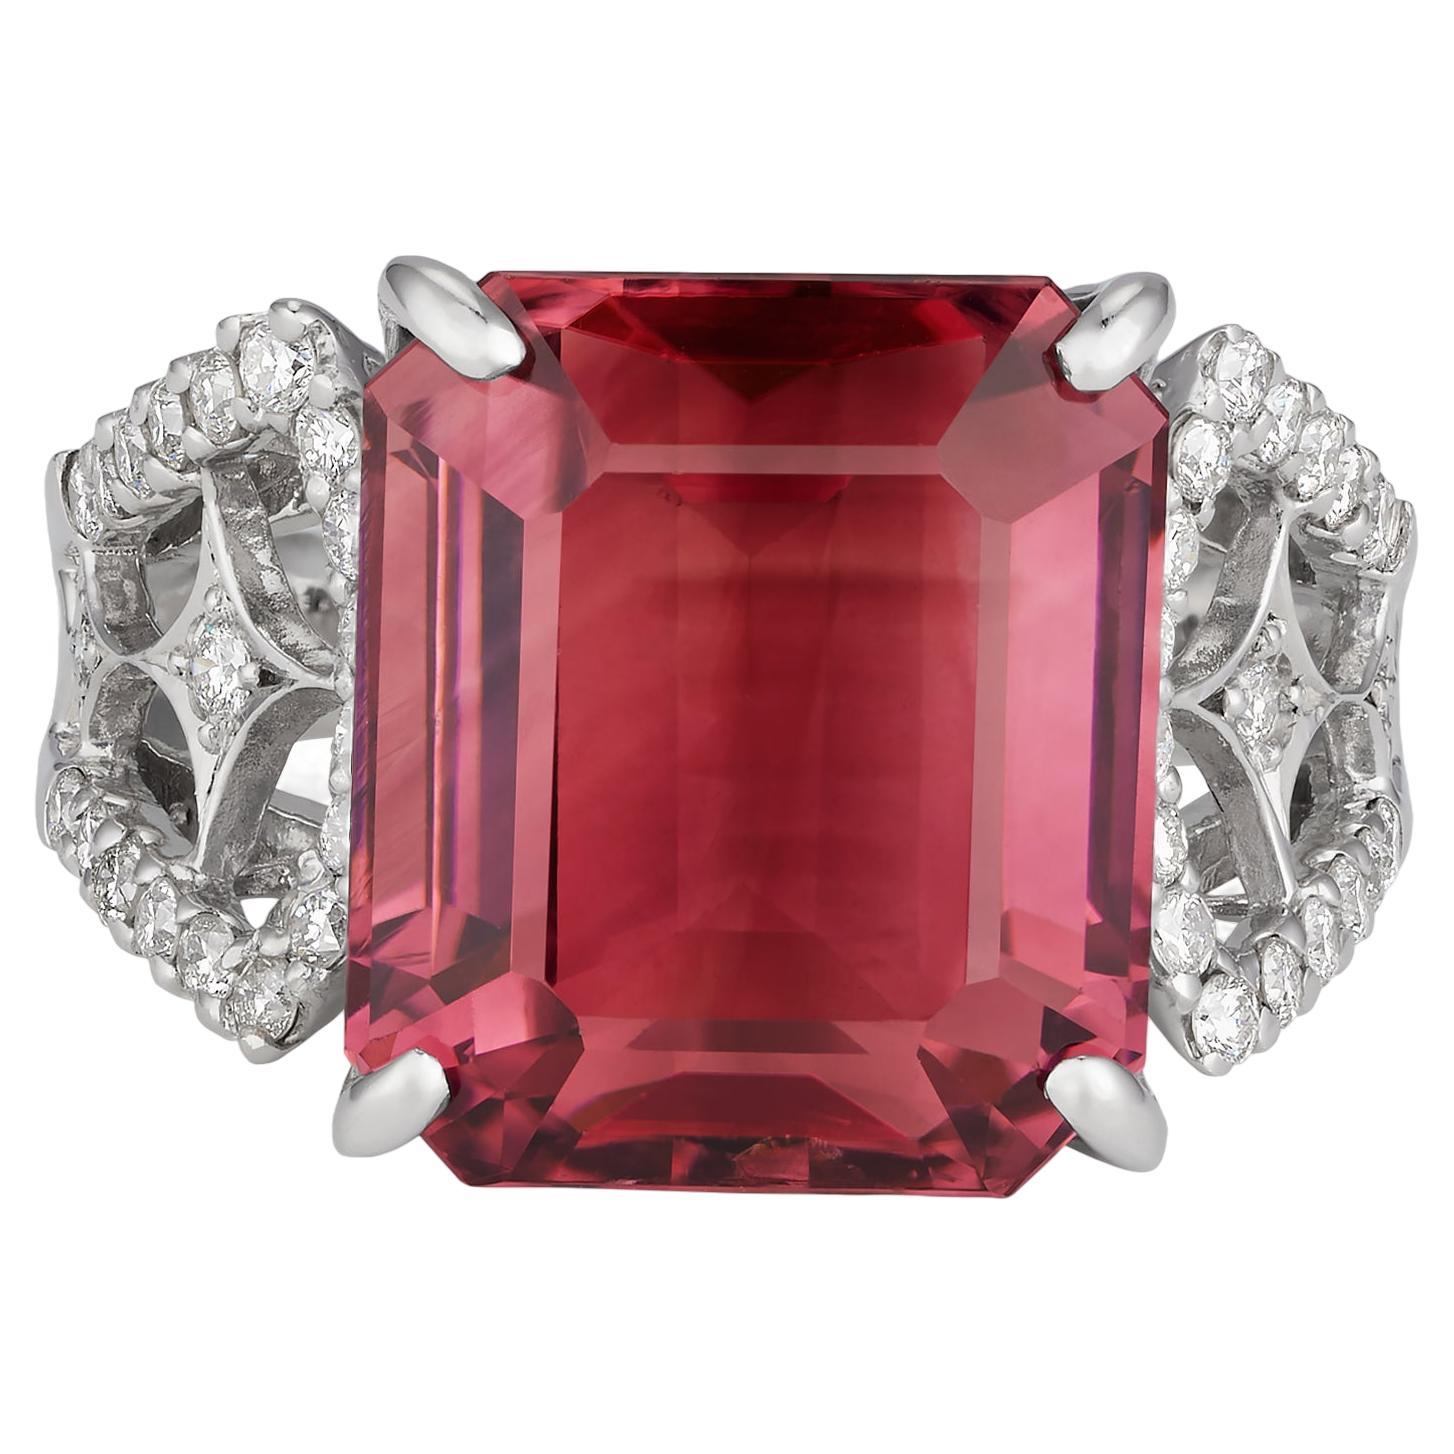 Pink Tourmaline 14 Carats Ring with Diamonds in 18K Gold